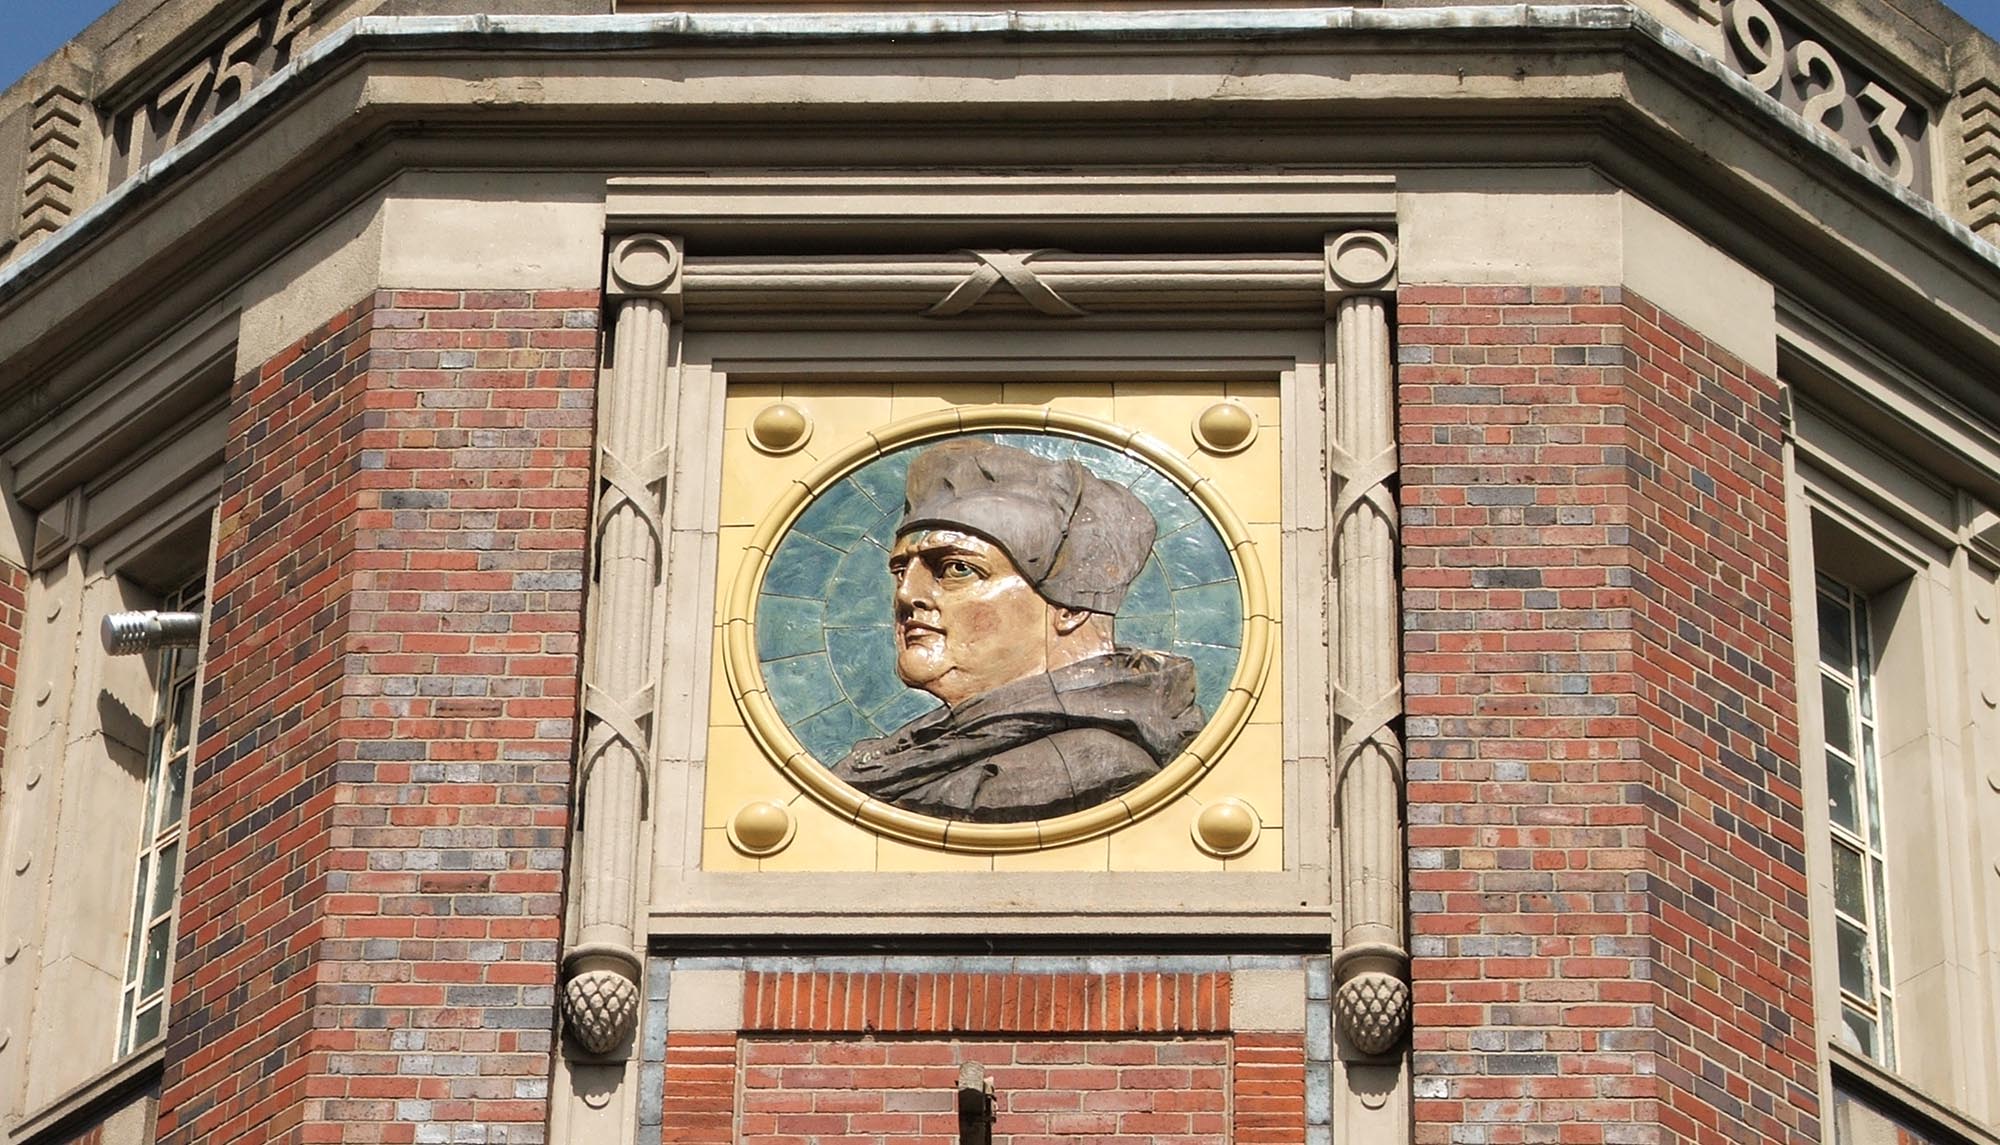 A large portrait of Cardinal Wolsey on the former Wolsey Knitwear Factory near to Abbey Park, built in 1923 -